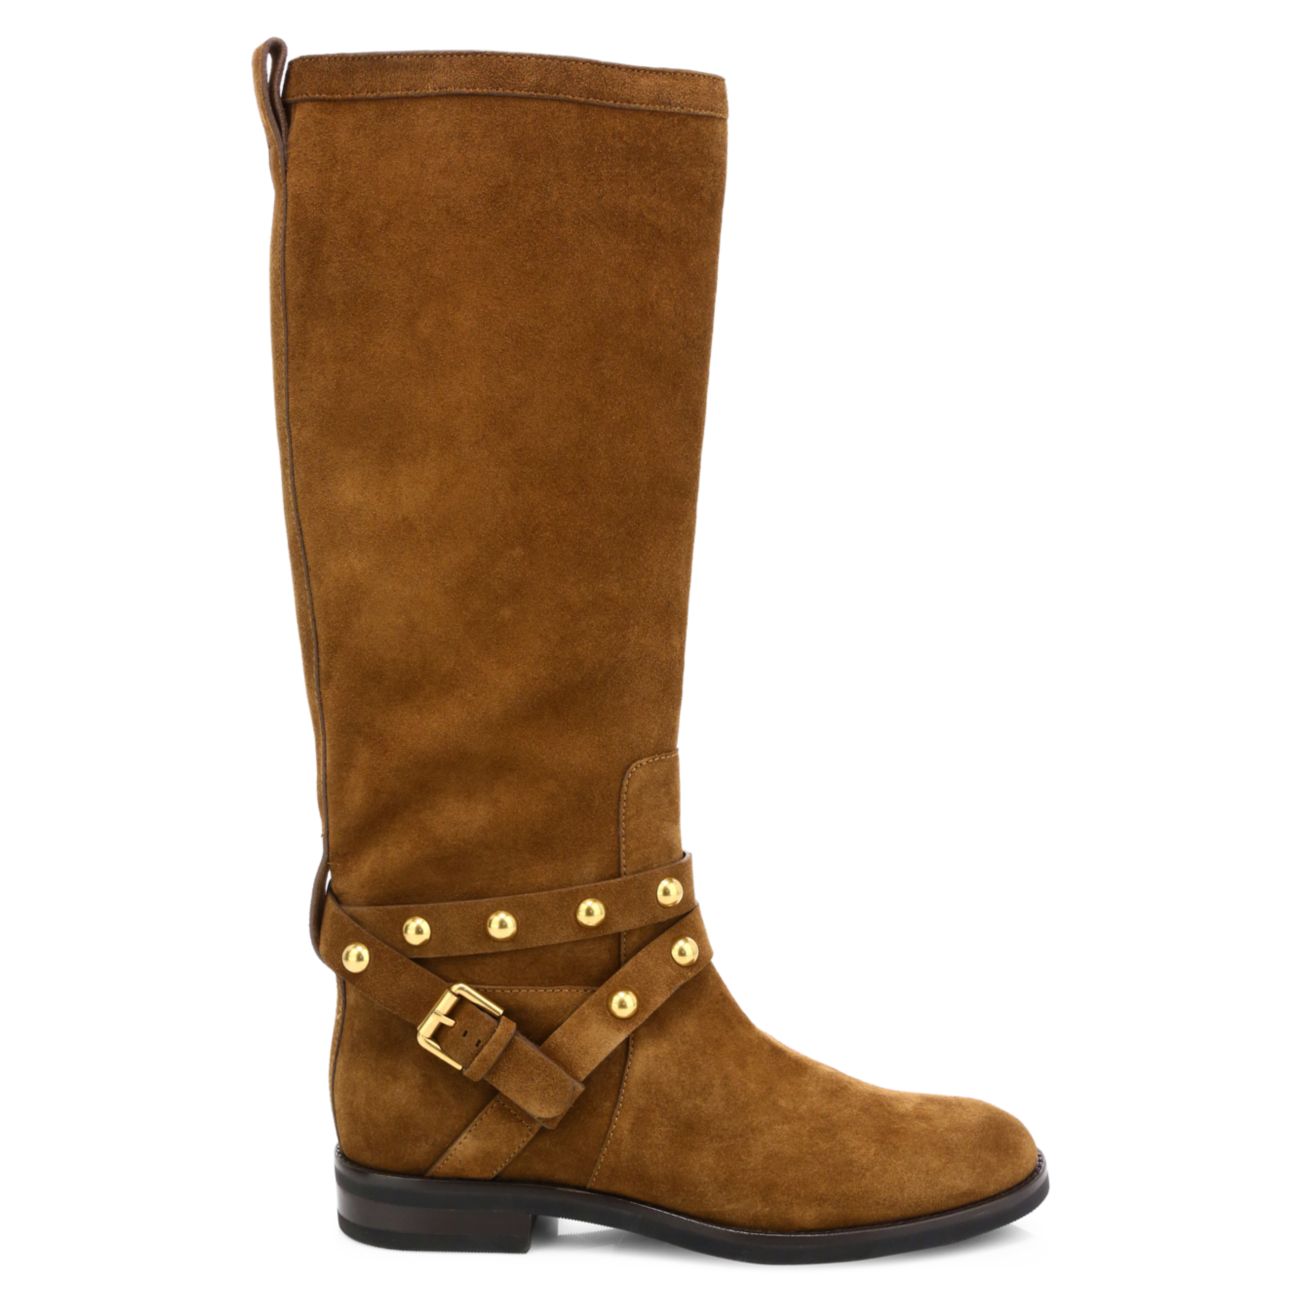 Janis Studded Knee-High Suede Boots See by Chloe